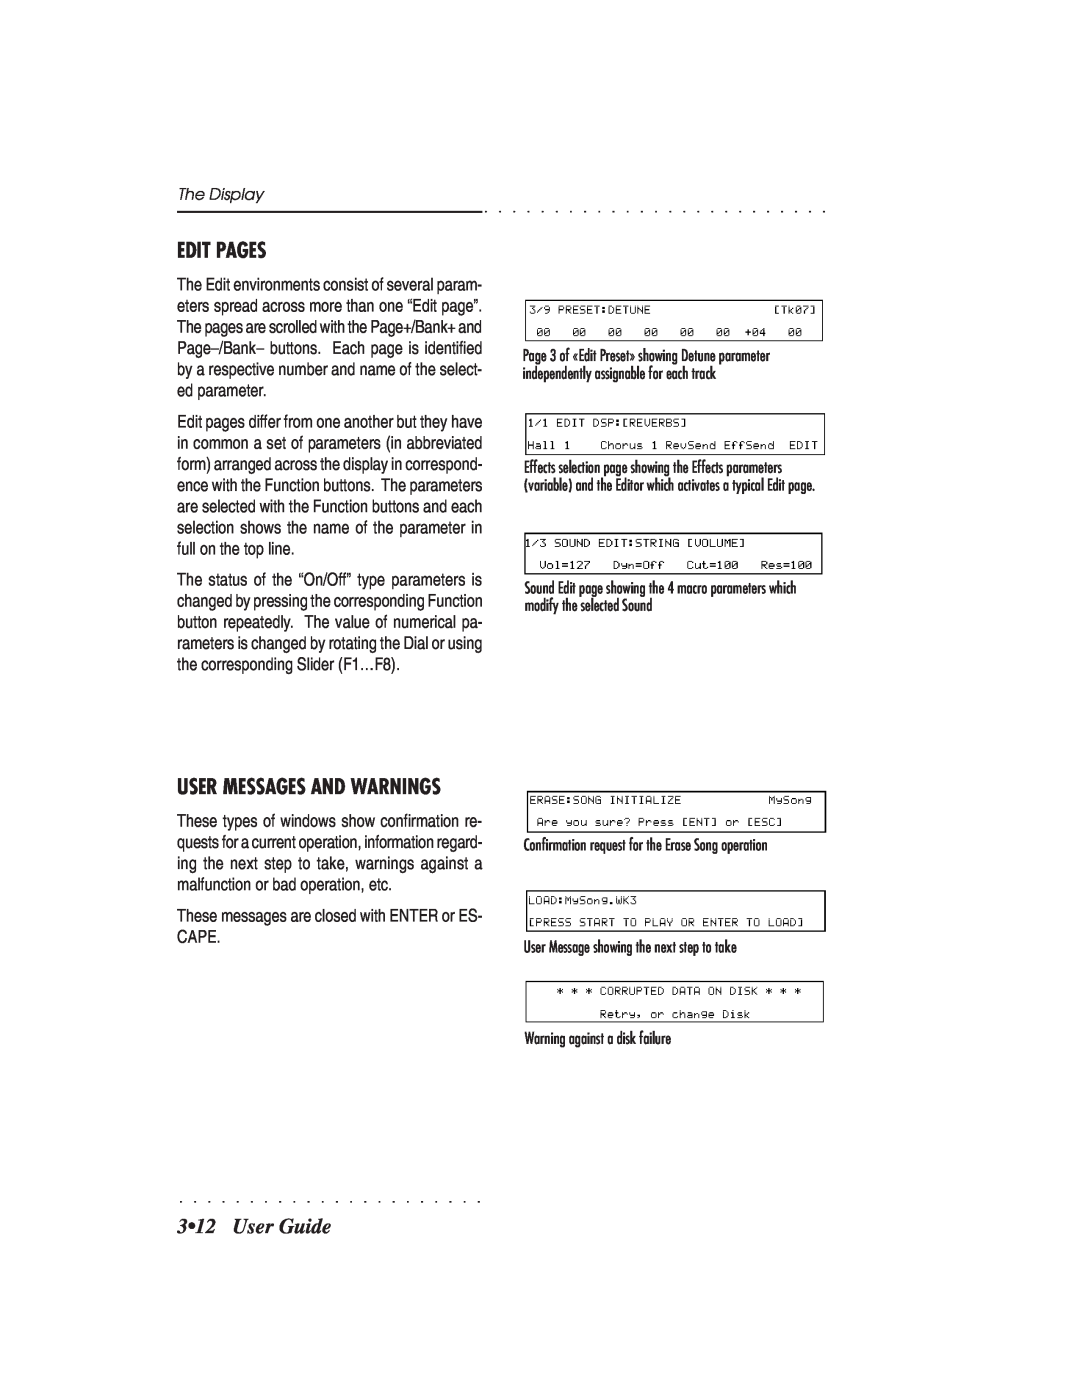 IBM PS1500 Edit Pages, User Guide, User Messages And Warnings, The Display, User Message showing the next step to take 